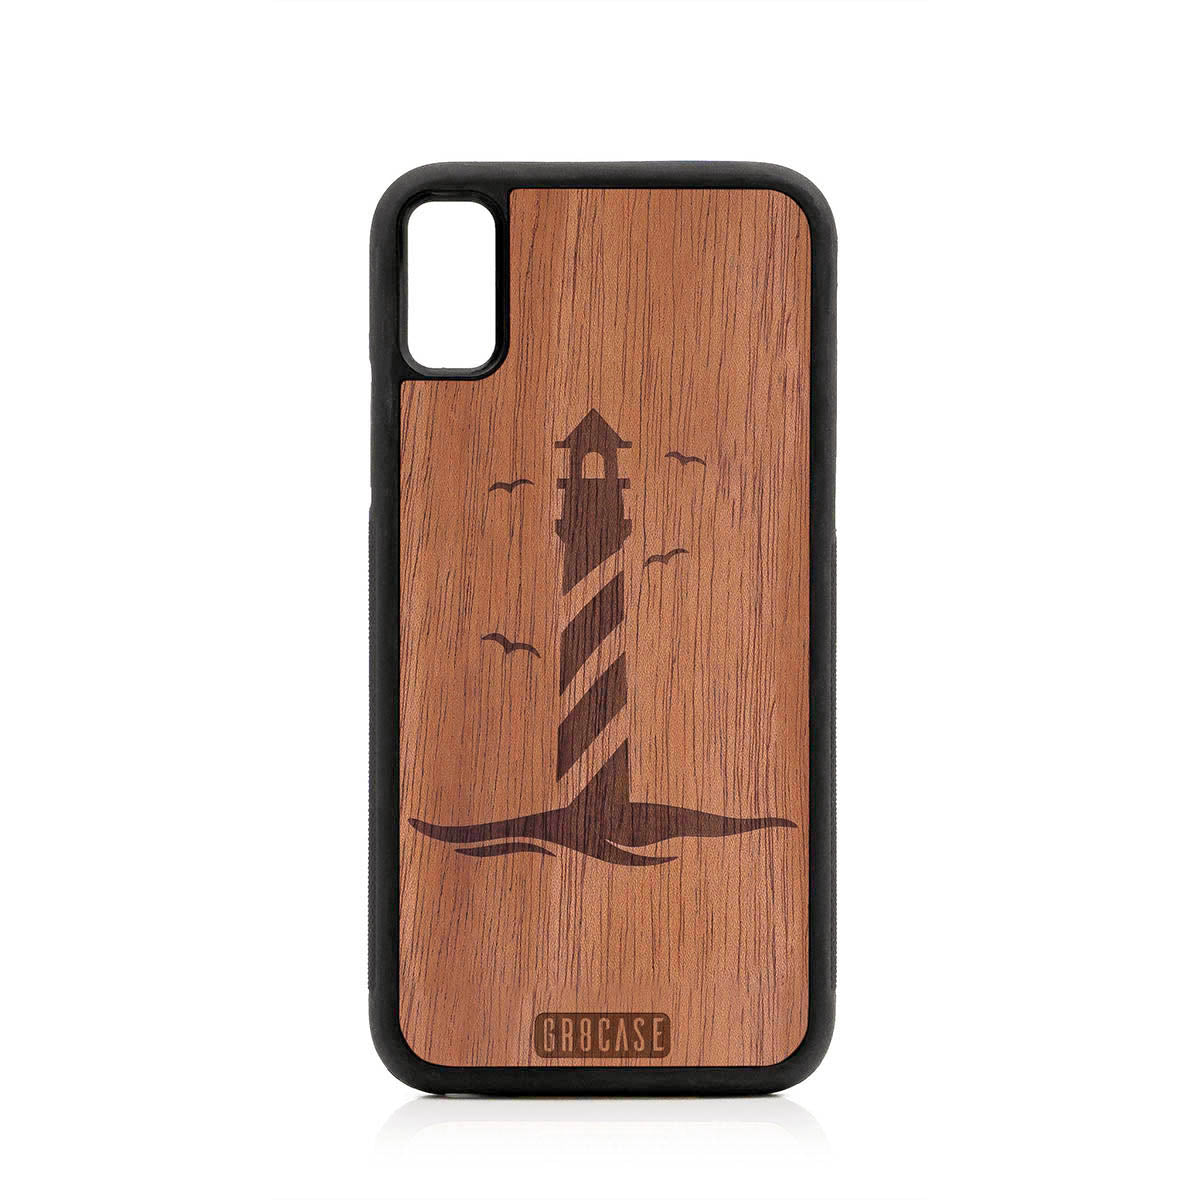 Lighthouse Design Wood Case For iPhone XS Max